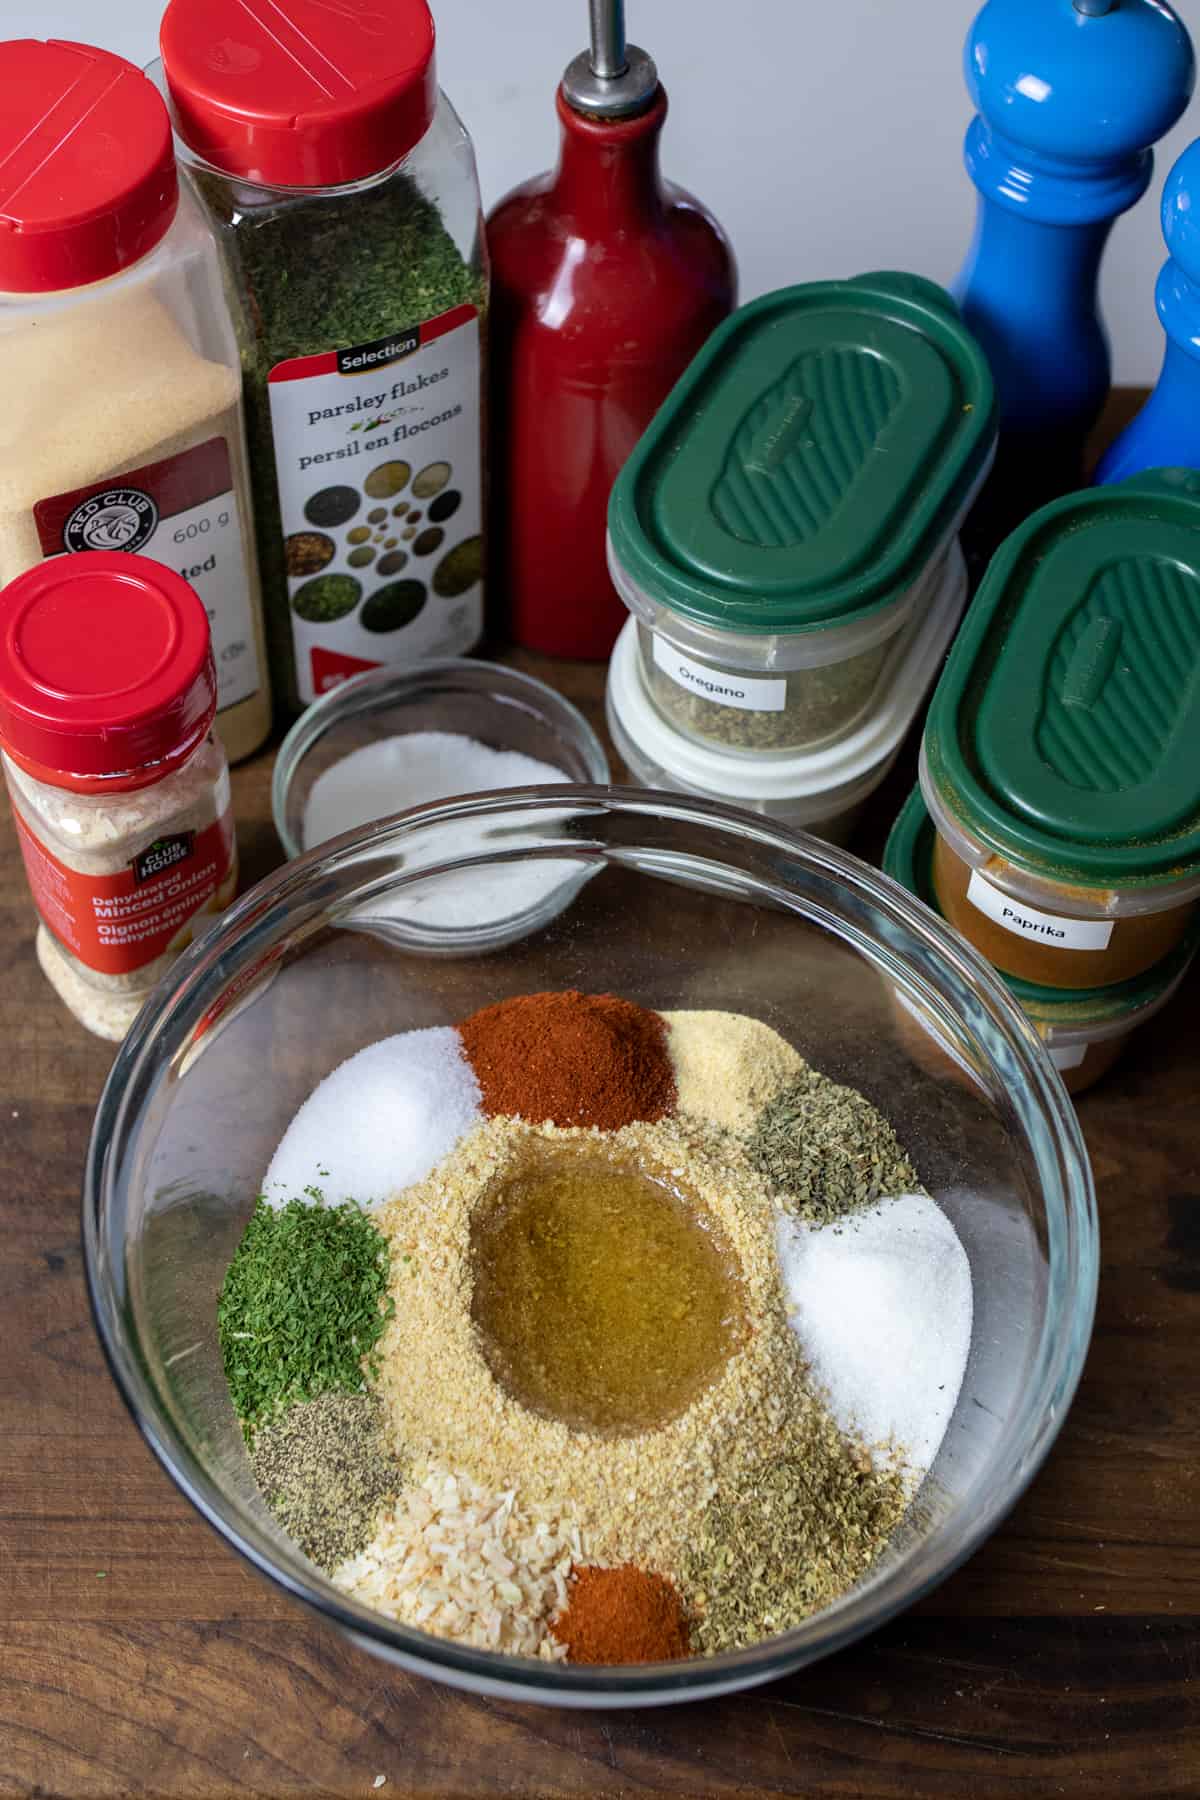 All of the ingredients added to a glass bowl so that each ingredient is separate from each other.